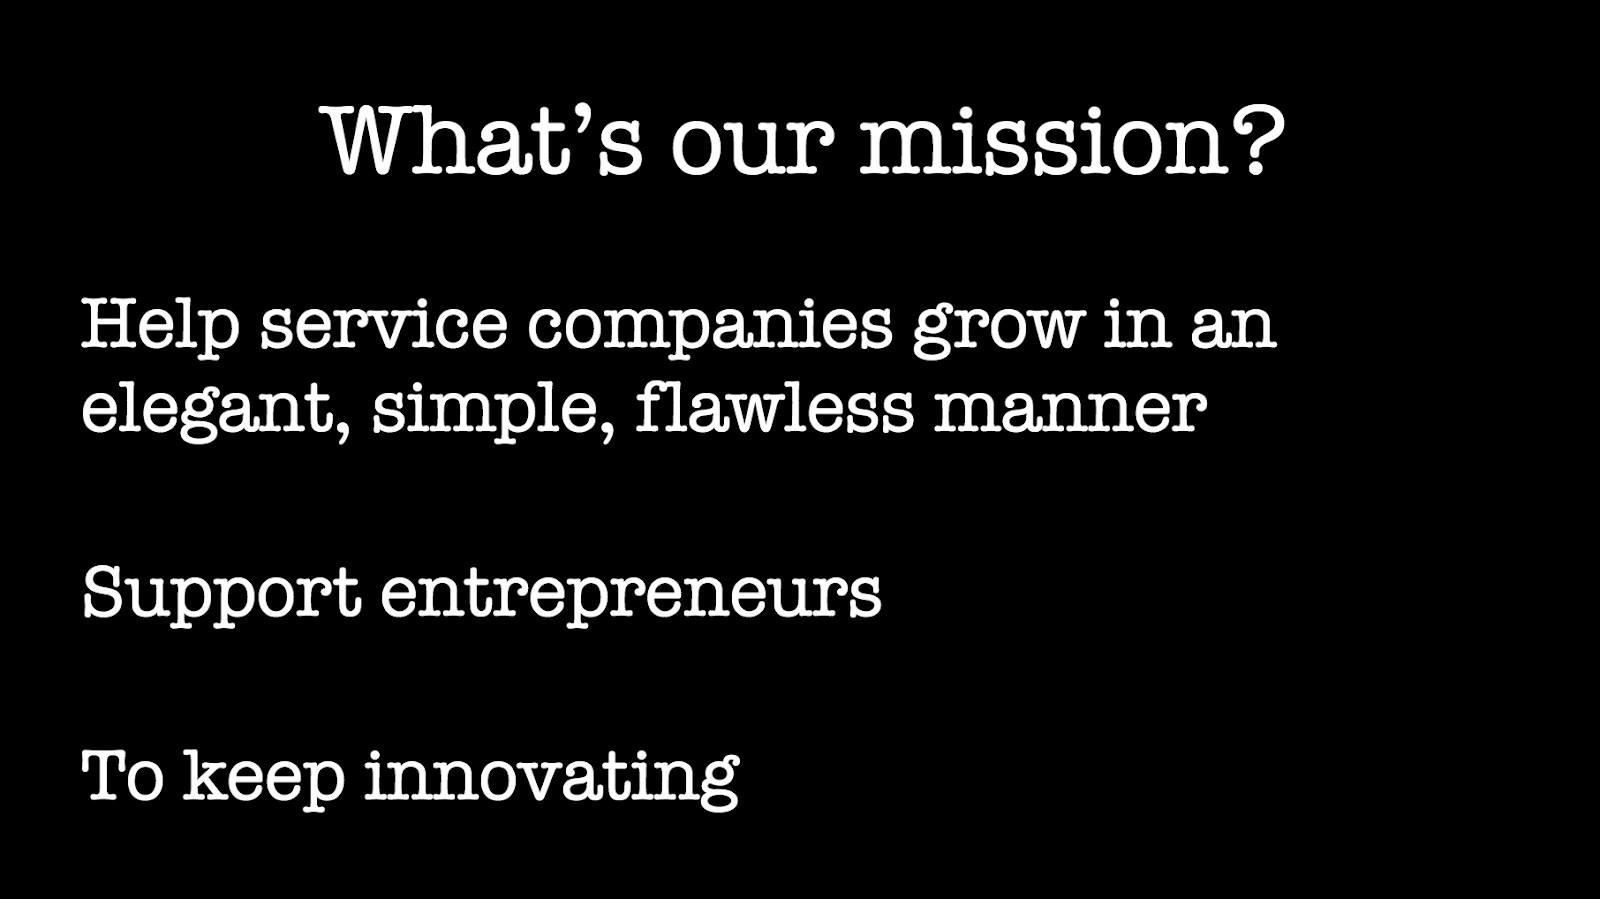 What's our mission?